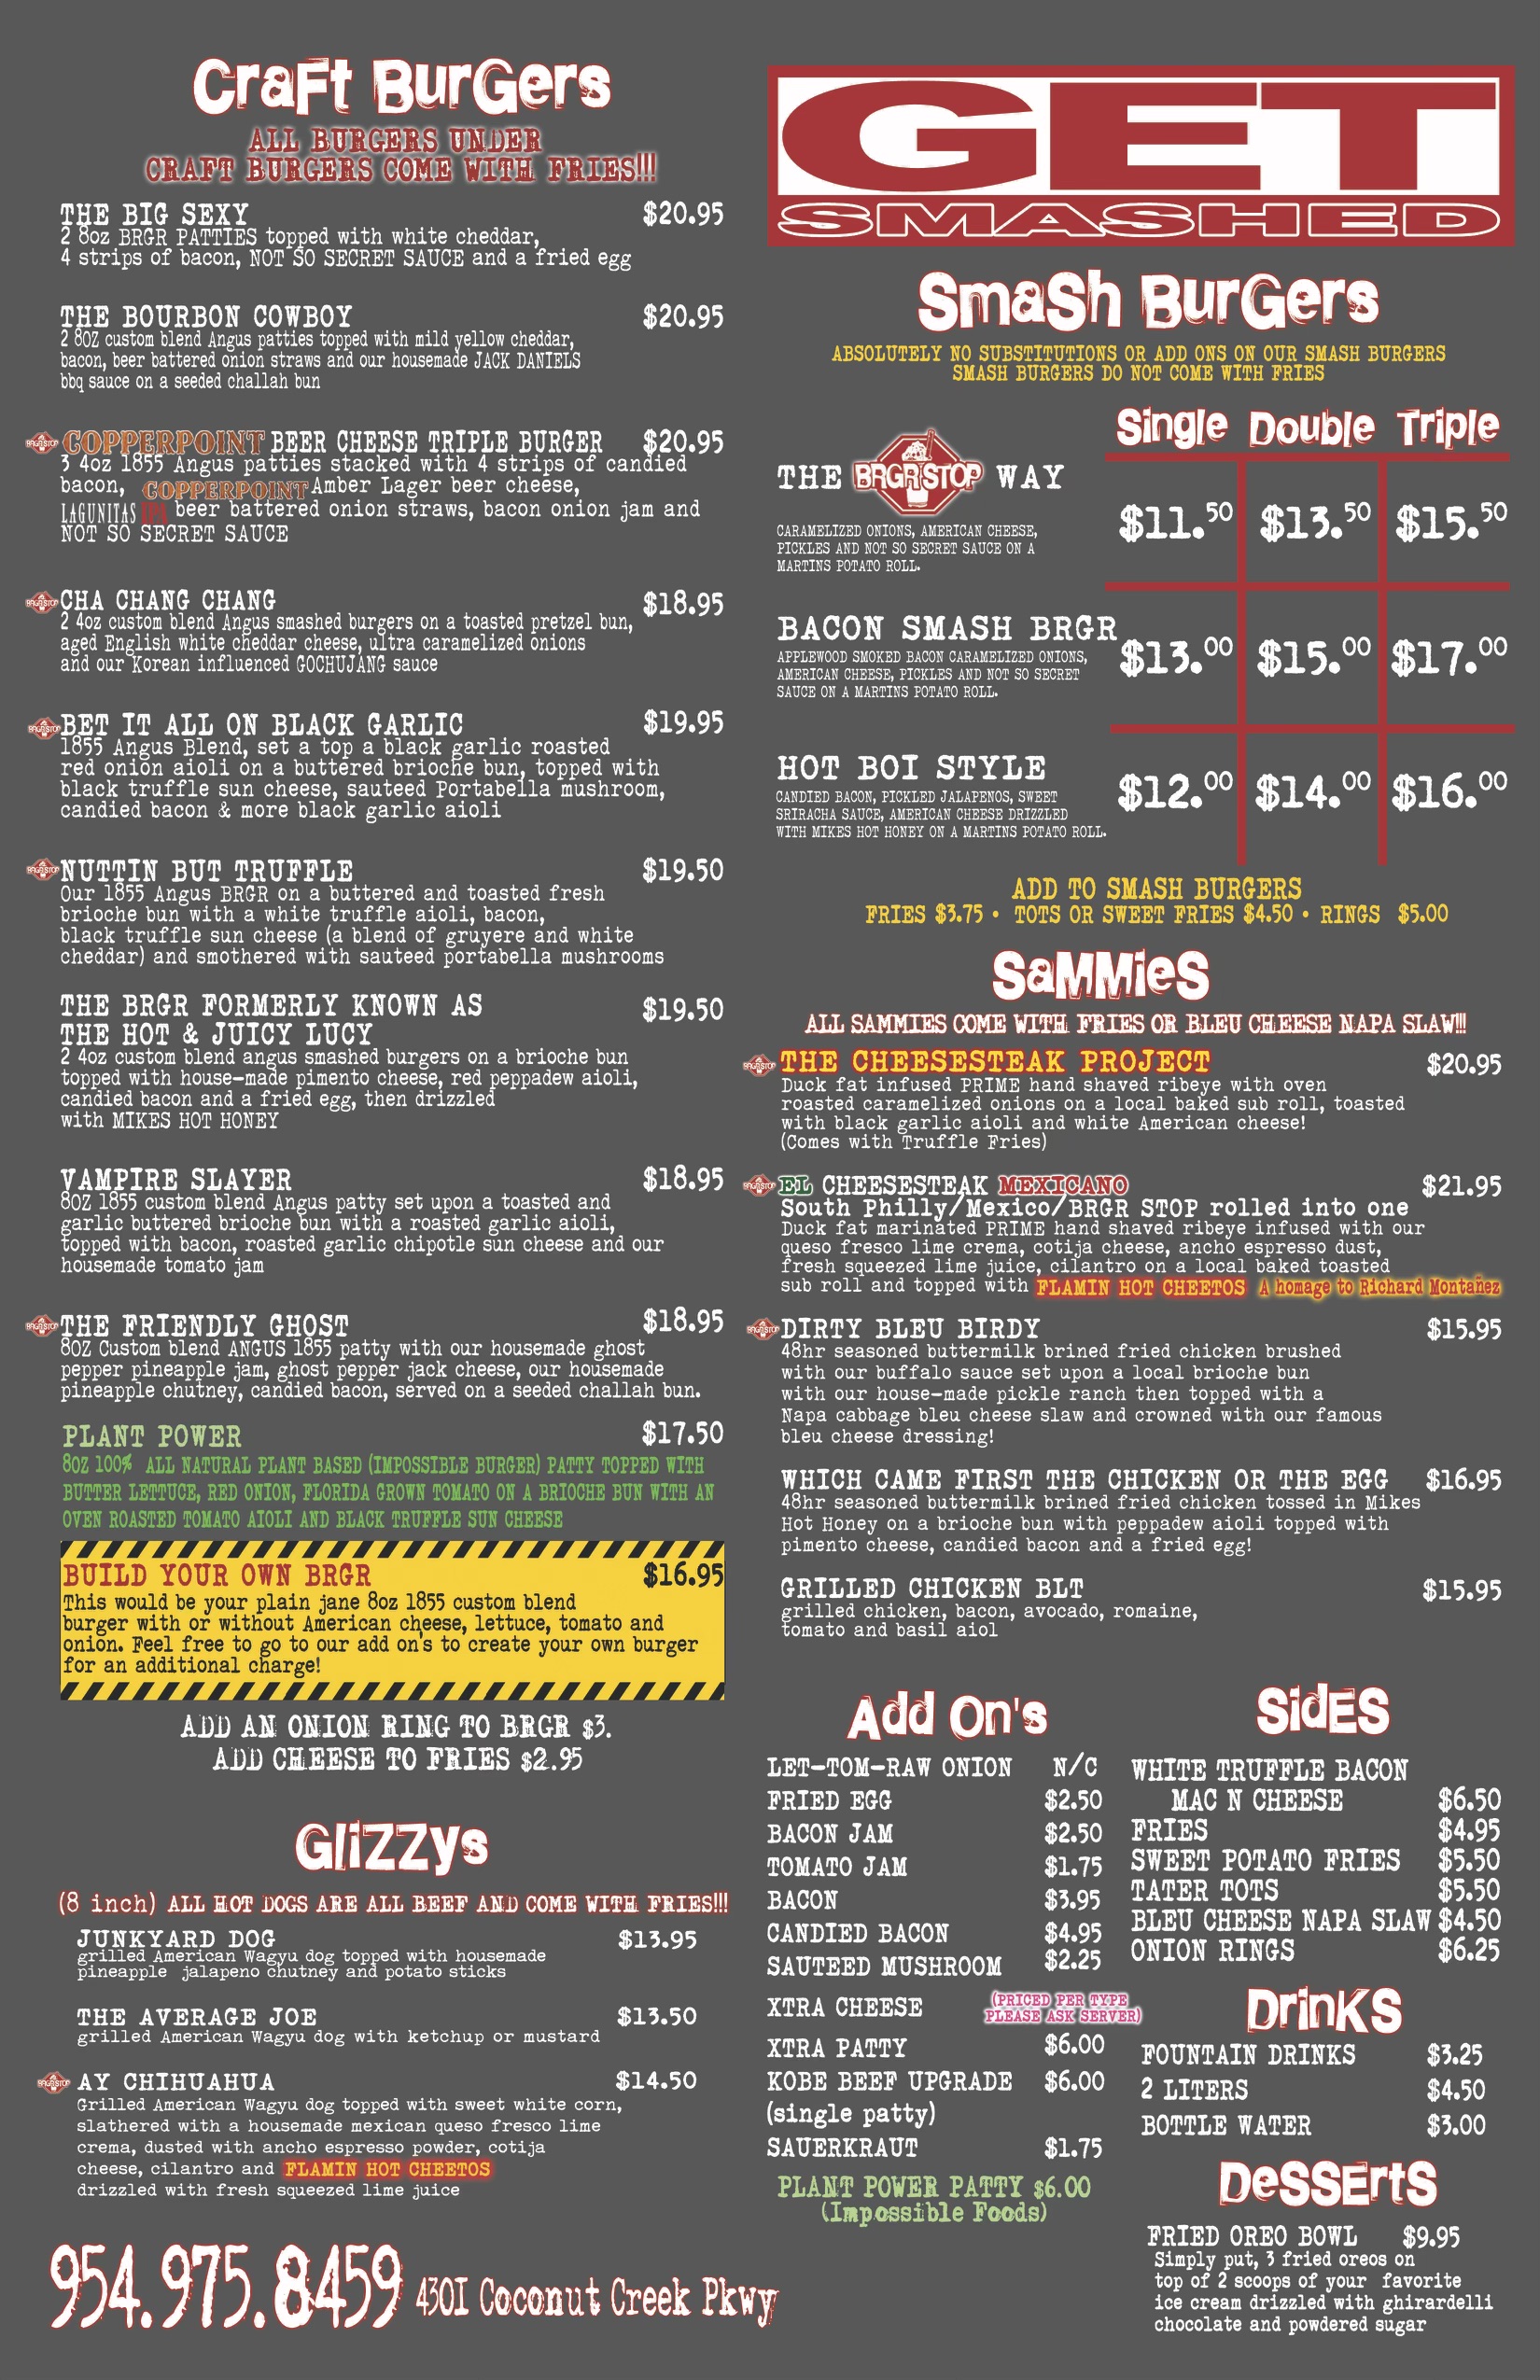 Front and back of a menu from BRGRSTOP, featuring various categories of food such as appetizers, salads, grilled wings, fried wings, and craft burgers, along with information on craft beers, milkshakes, and delivery services.